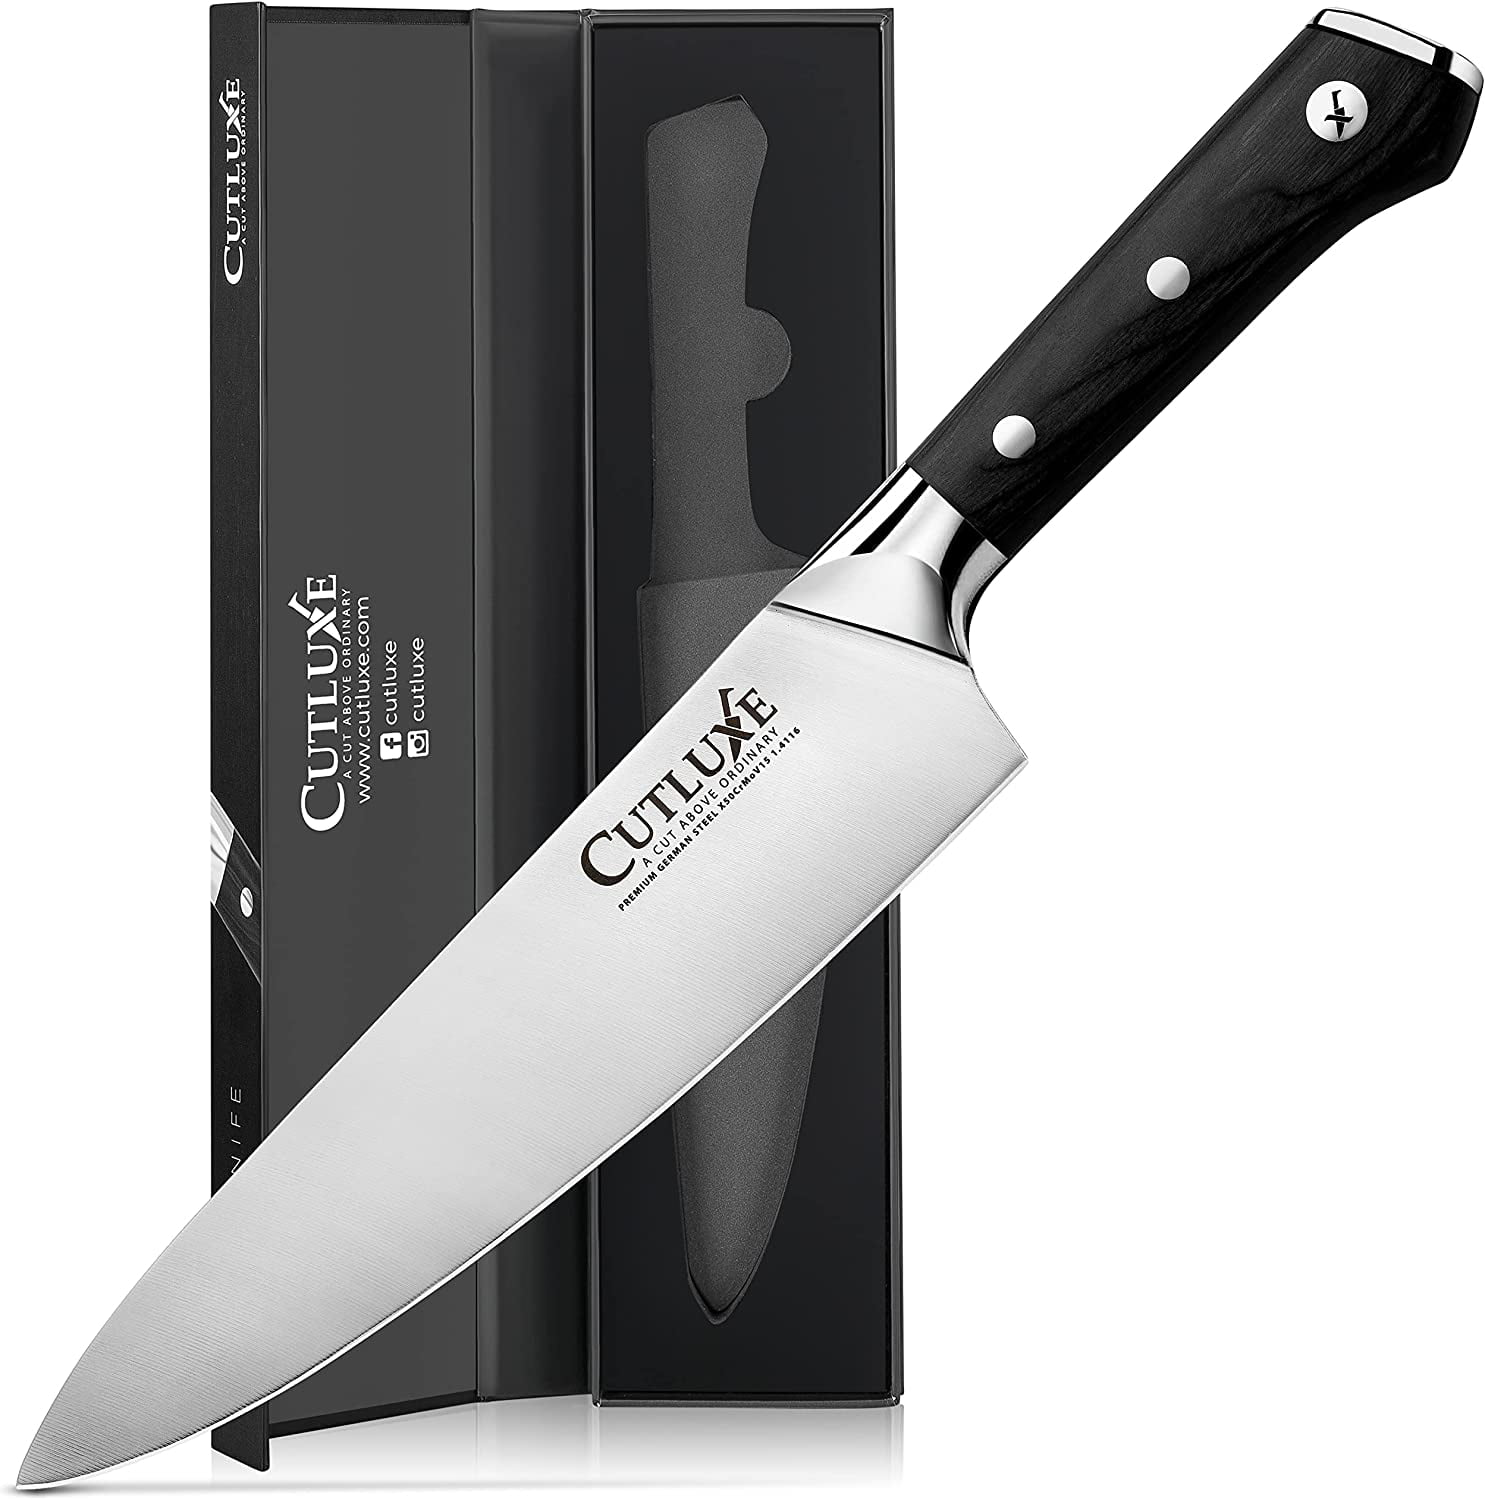 Kitchen Knife, Household Slicing Knife, Lightweight Compact Chef